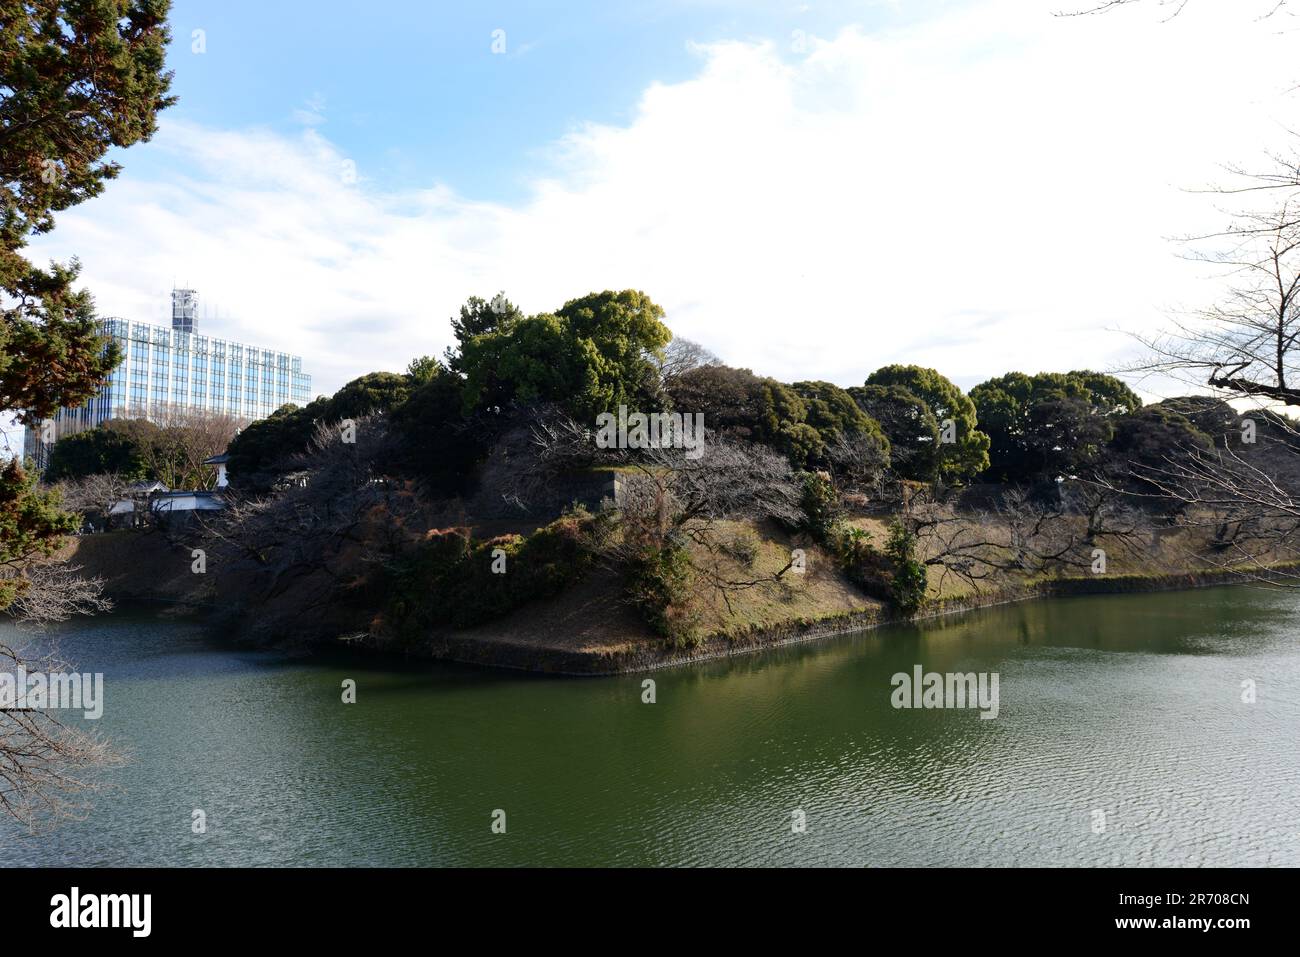 The moat around the Imperial palace in Chiyoda, Tokyo, Japan. Stock Photo